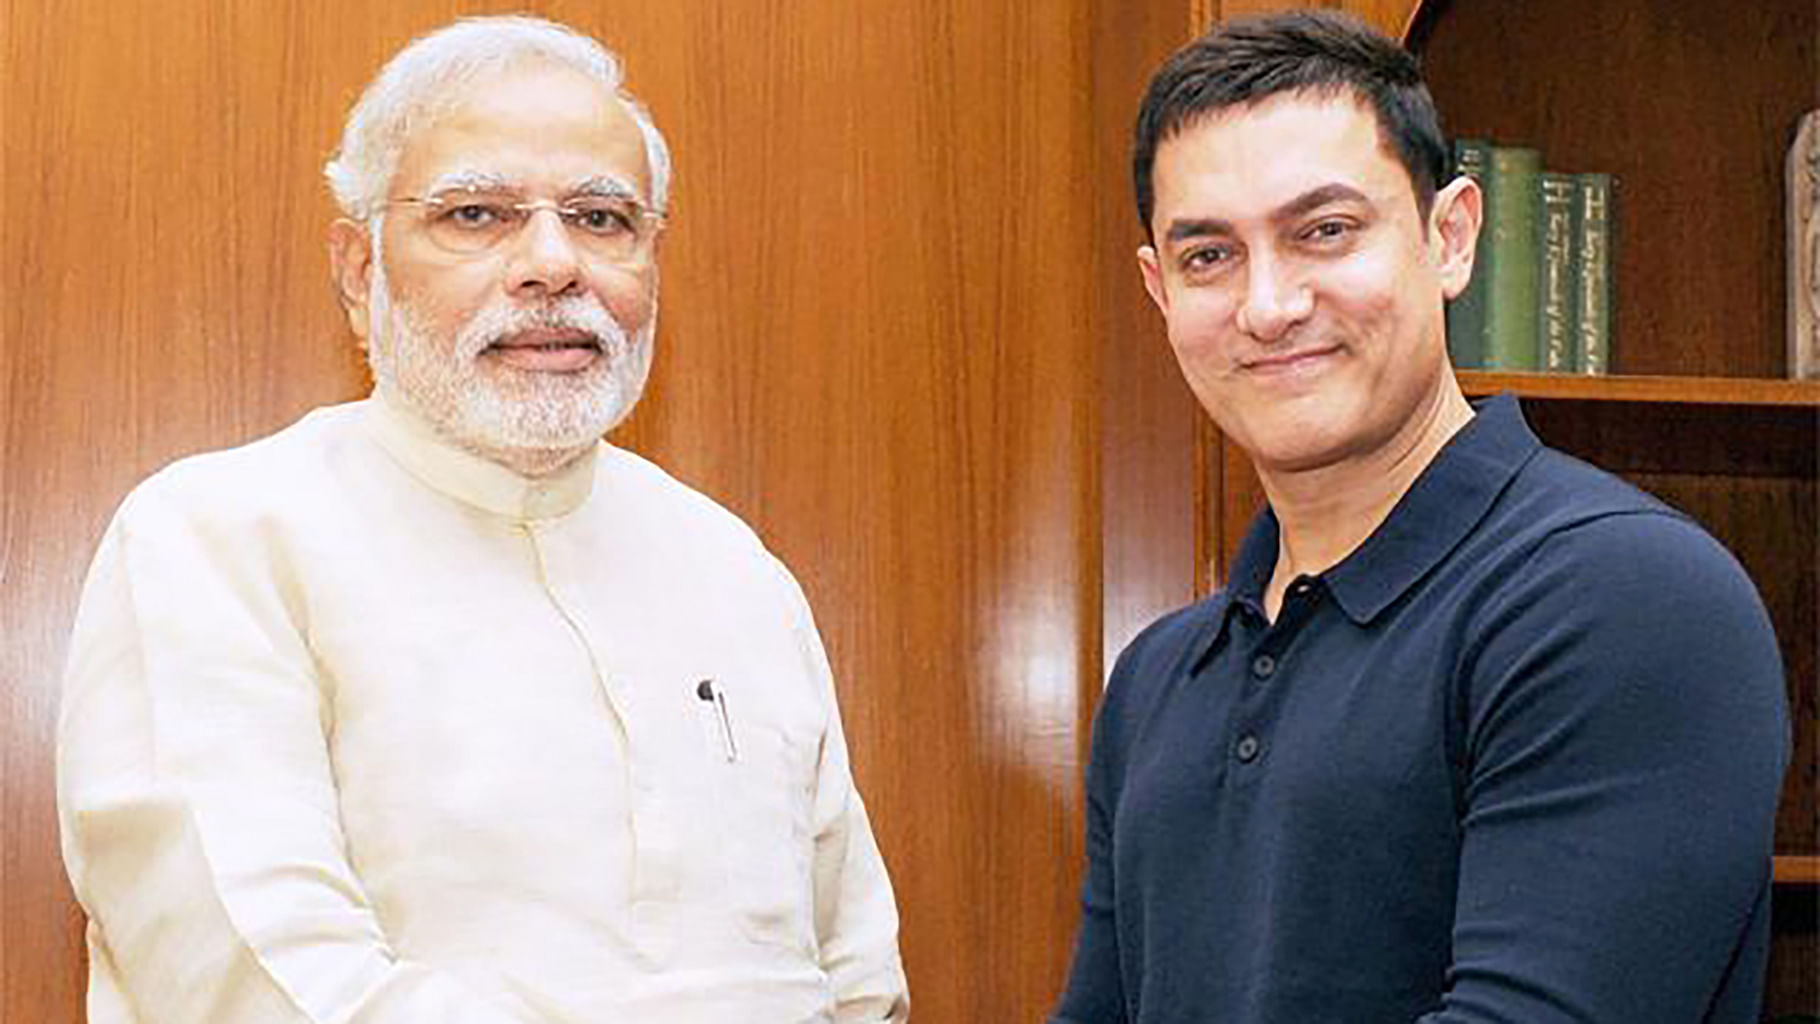 Narendra Modi with Aamir Khan after meeting in New Delhi. (Photo: PTI)